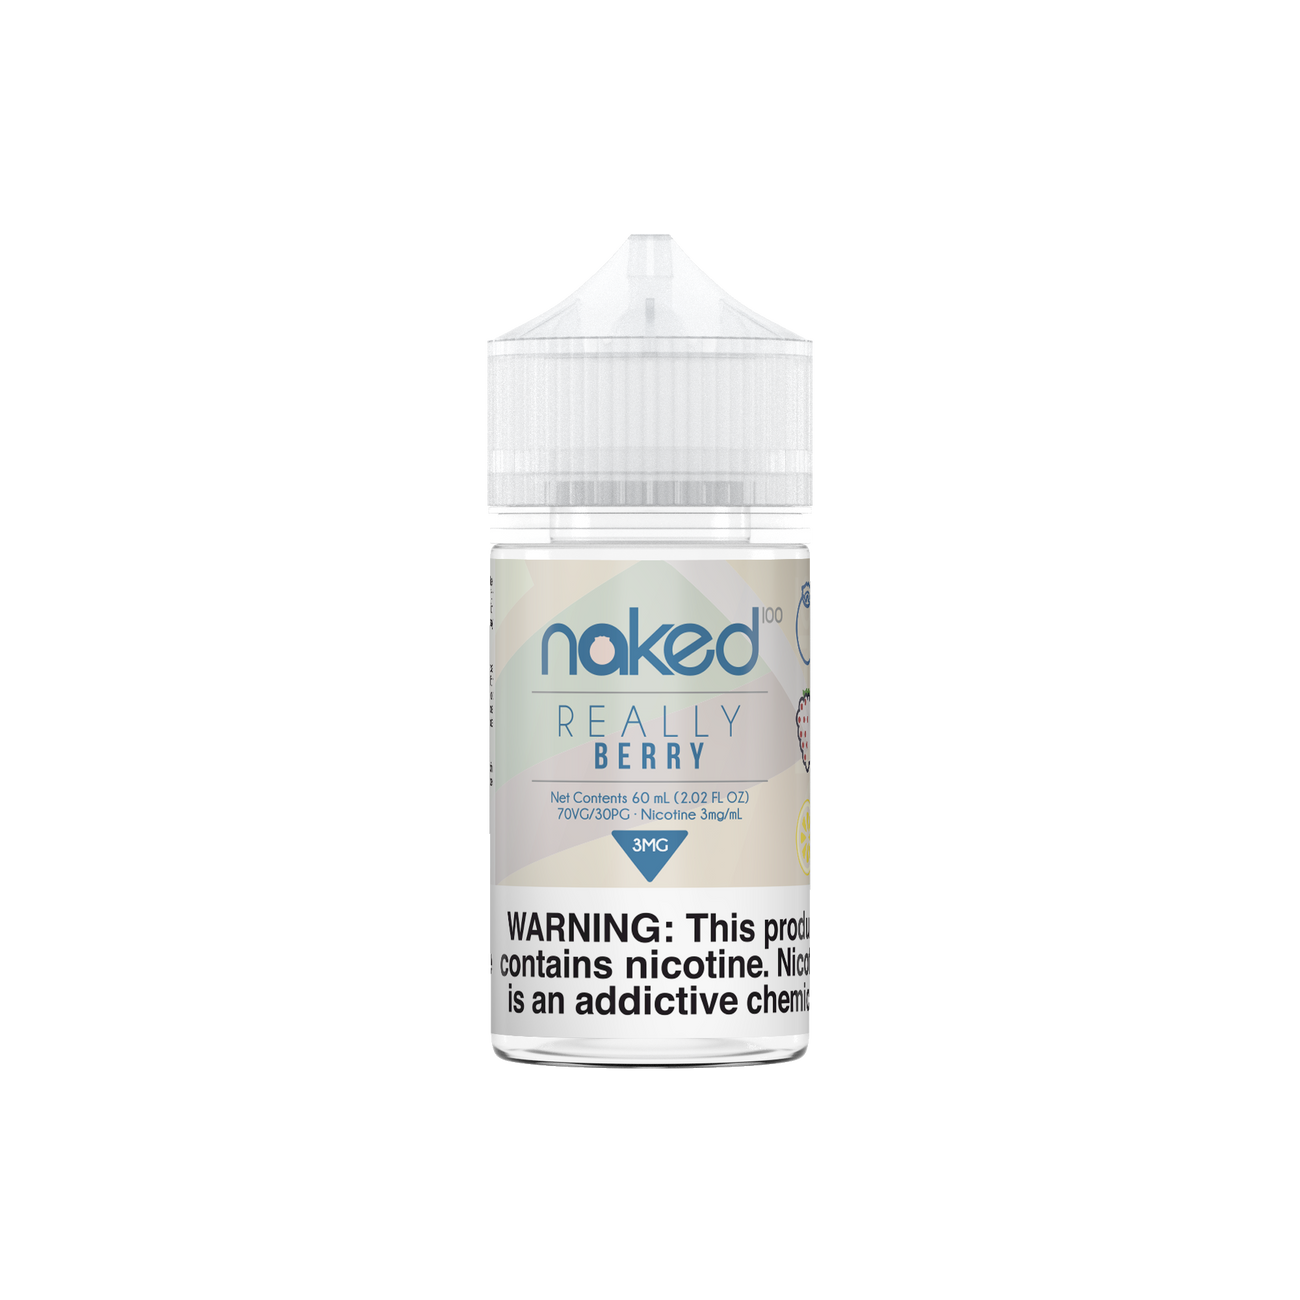 Naked: Really Berry